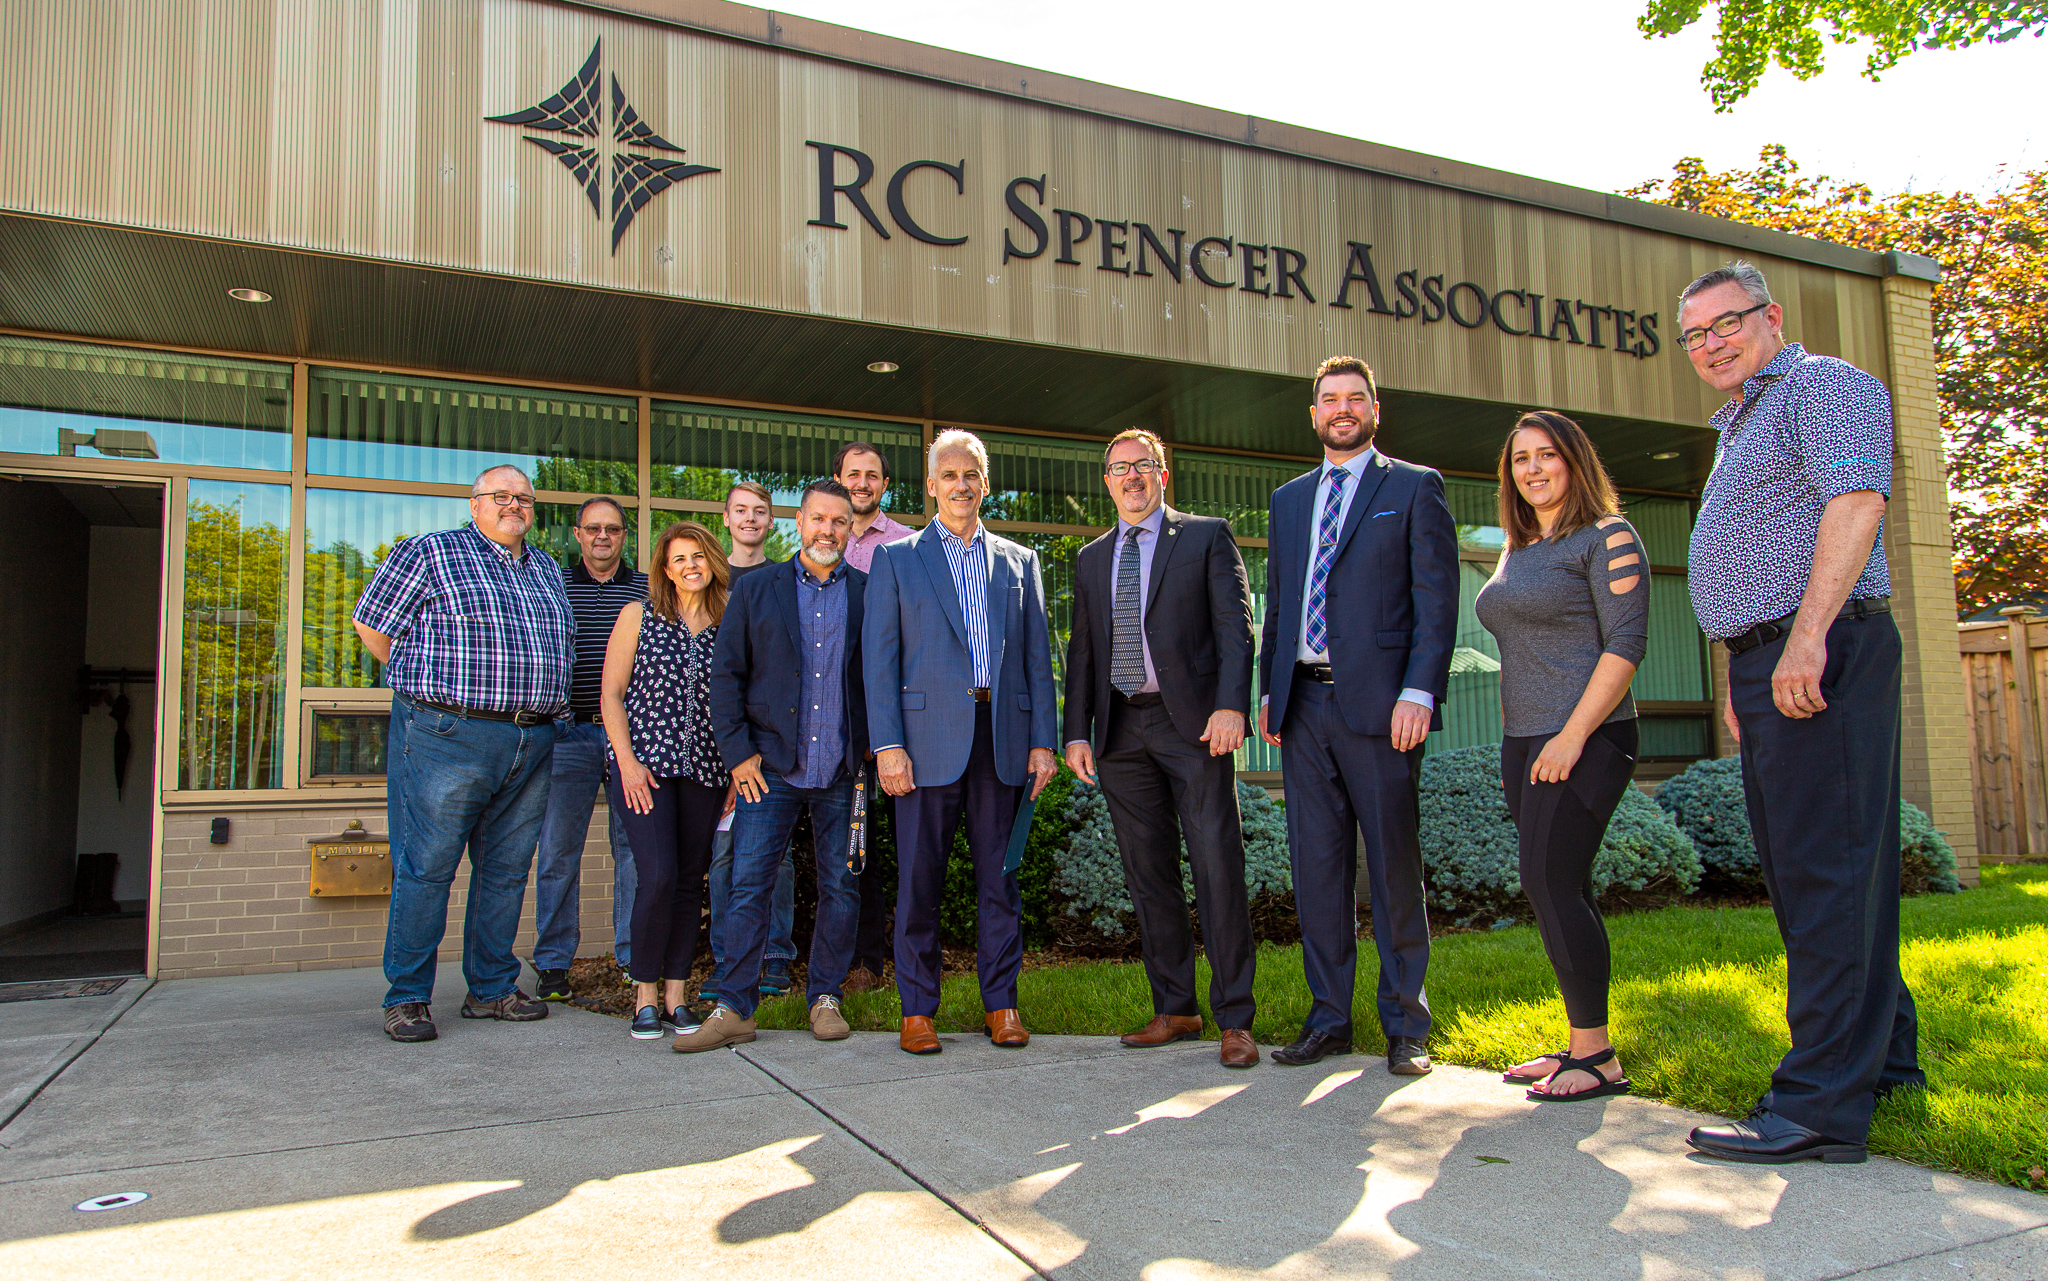 RC Spencer Associates are moving in to their new location today